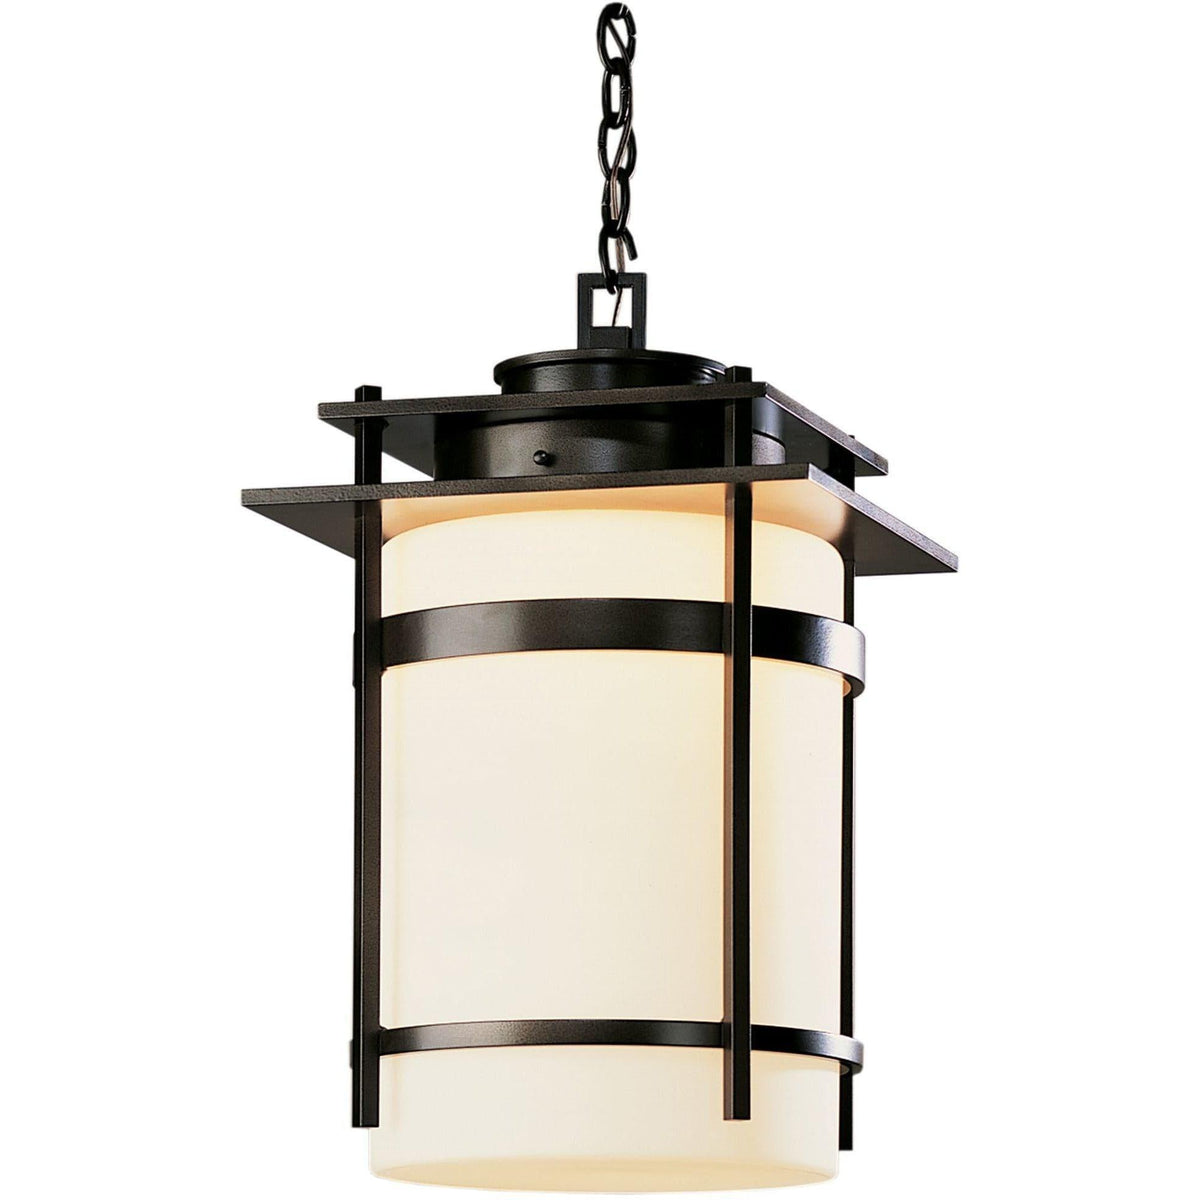 Hubbardton Forge - Banded 14-Inch One Light Outdoor Ceiling Fixture - 365894-SKT-77-GG0148 | Montreal Lighting & Hardware